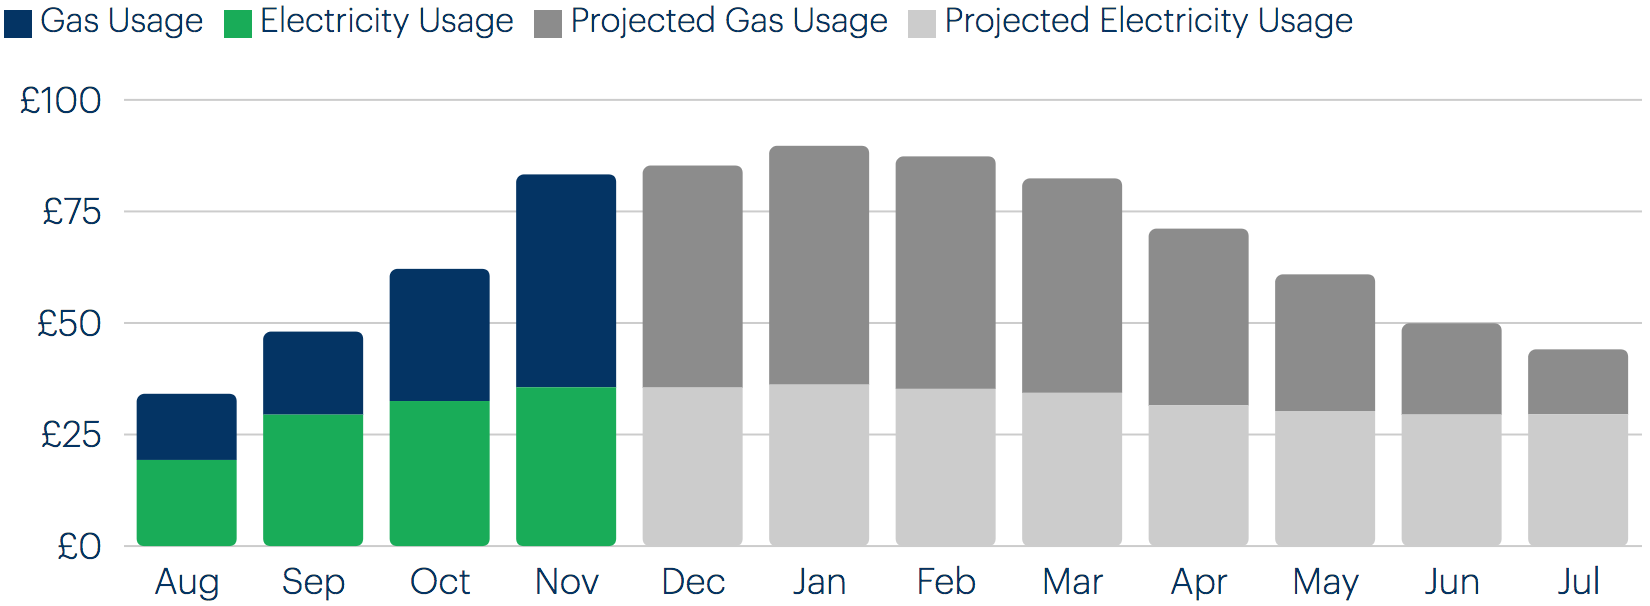 Bar chart showing electricity and gas usage over a 12 month period